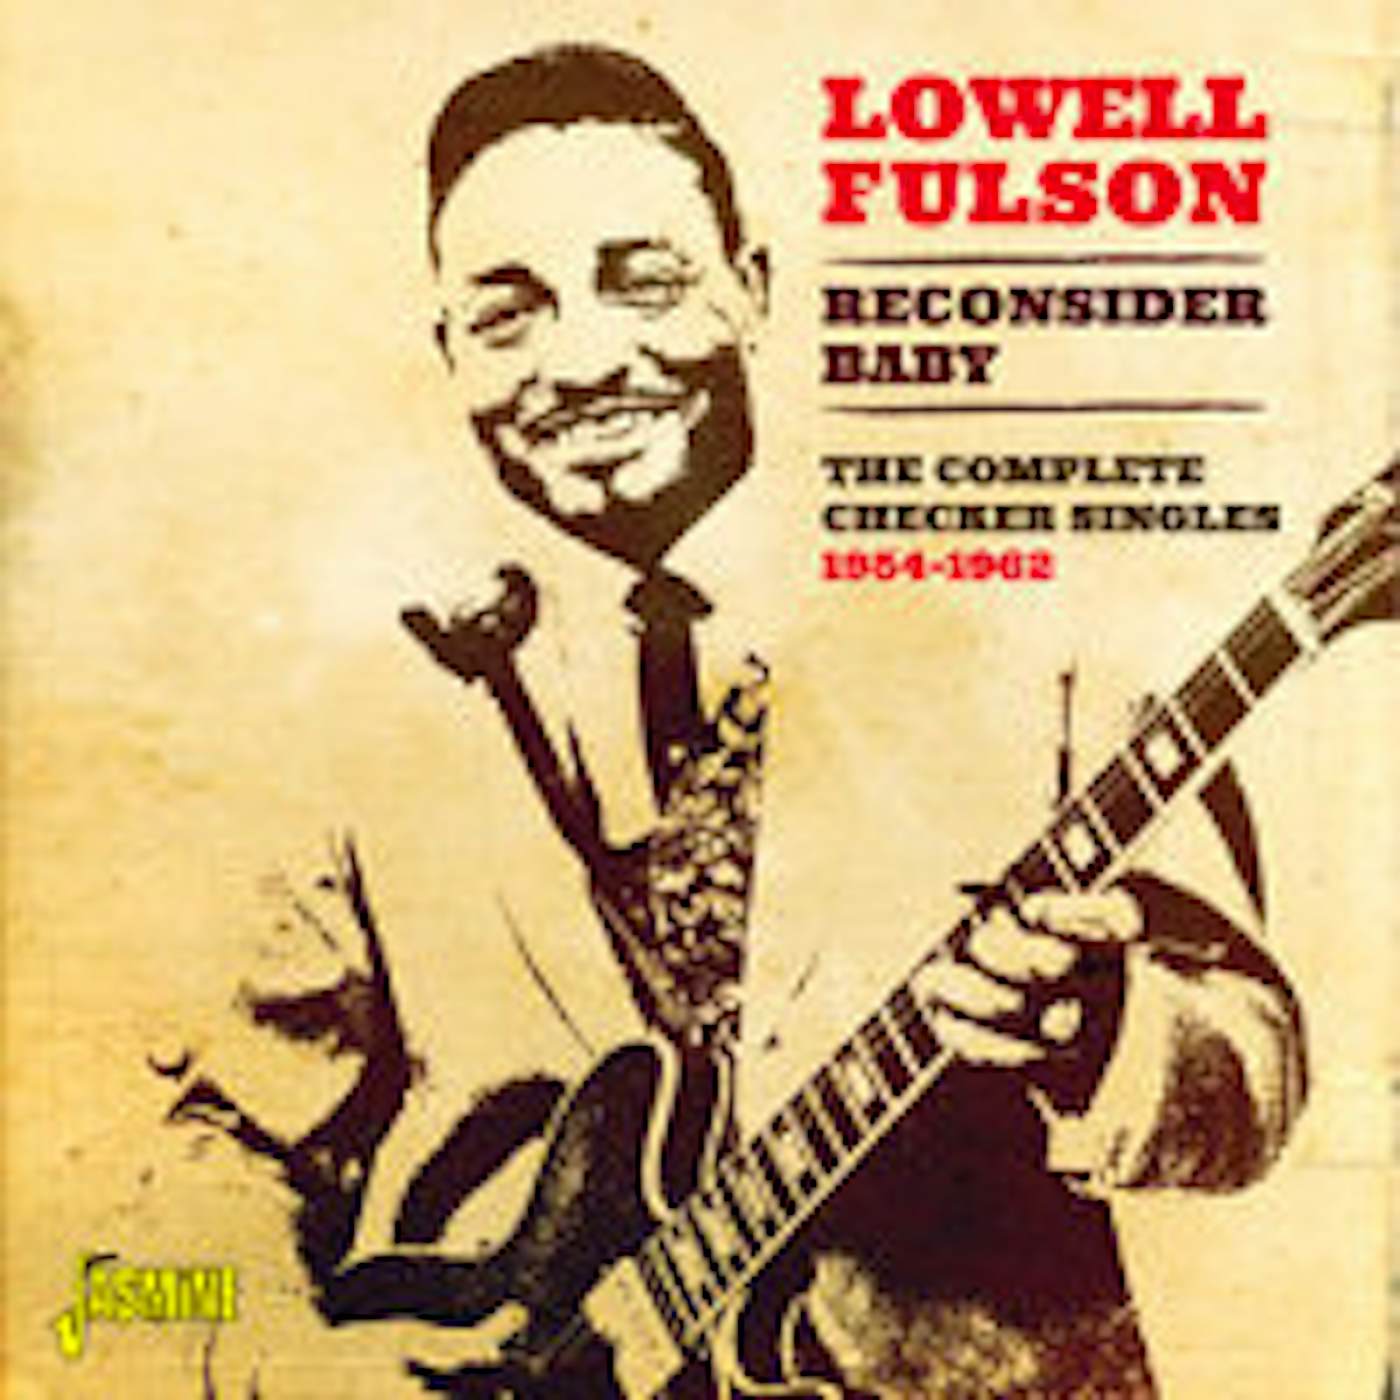 Lowell Fulson RECONSIDER BABY THE COMPLETE CHECKER SINGLES 1954 CD